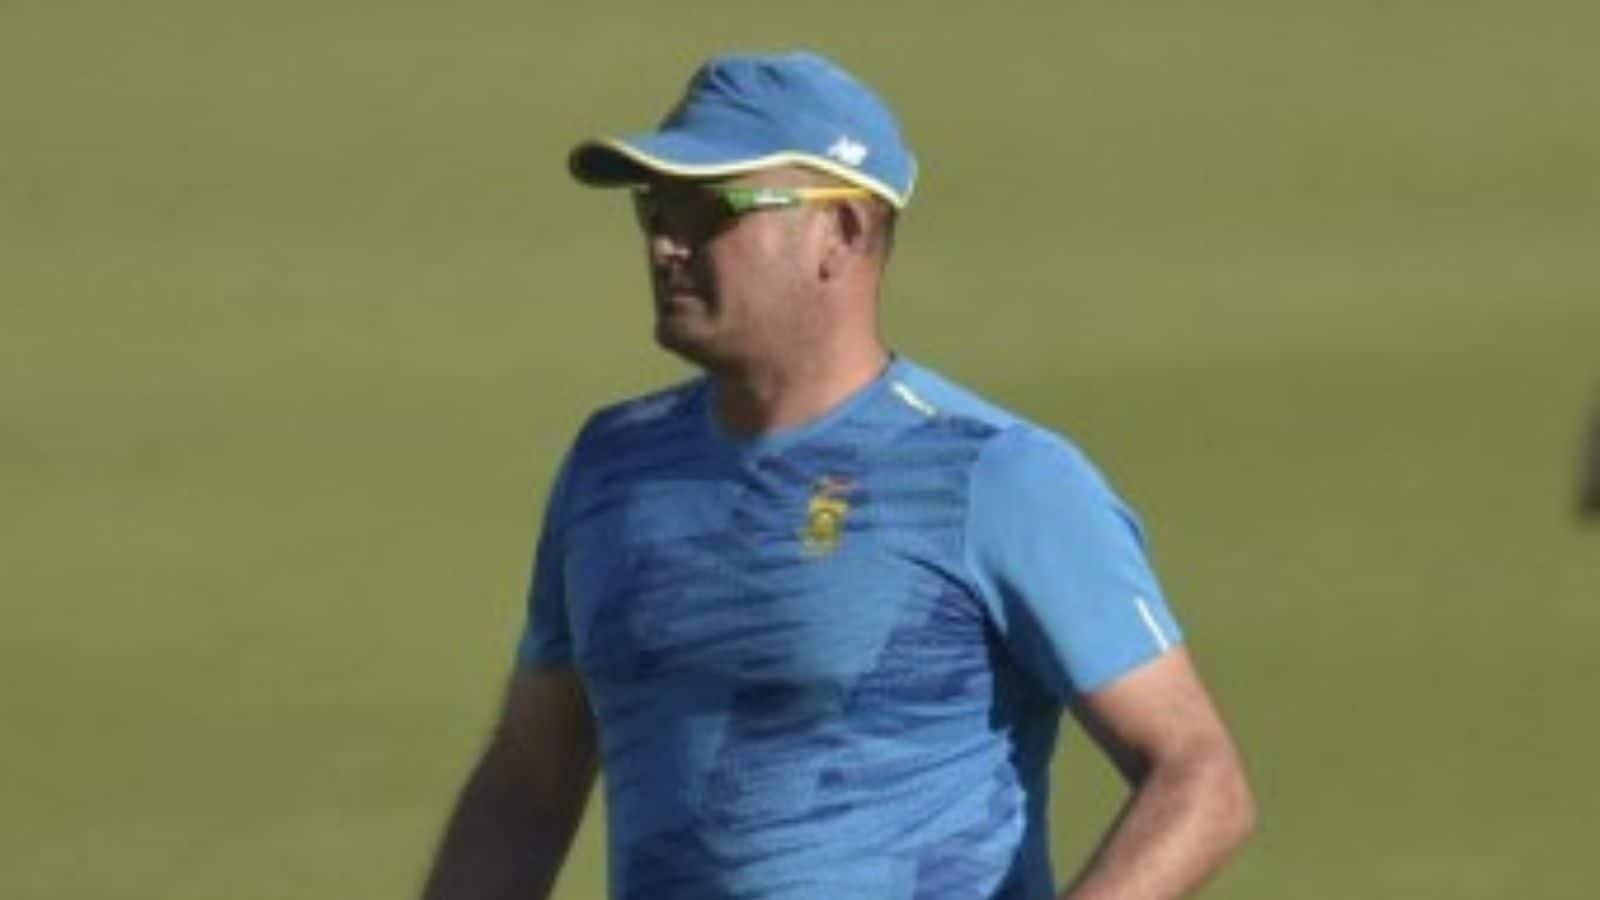 South Africa Head Coach Mark Boucher Set to Face Disciplinary Hearing For ‘Gross Misconduct’